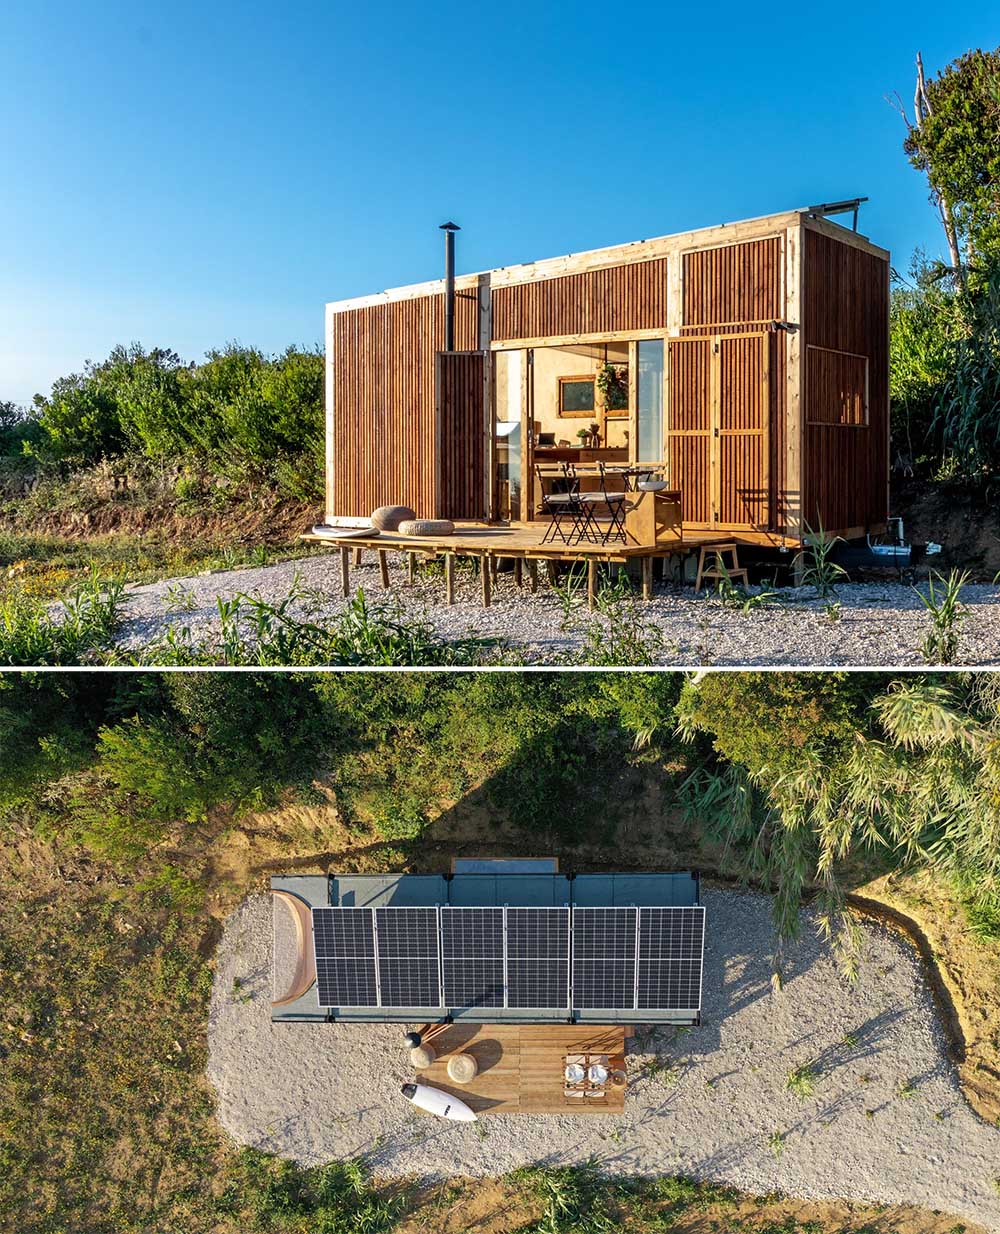 A modern tiny house covered in heat-treated timber, has solar panels, water collection system, a birch plywood interior, kitchen, bathroom, and two sleeping areas.